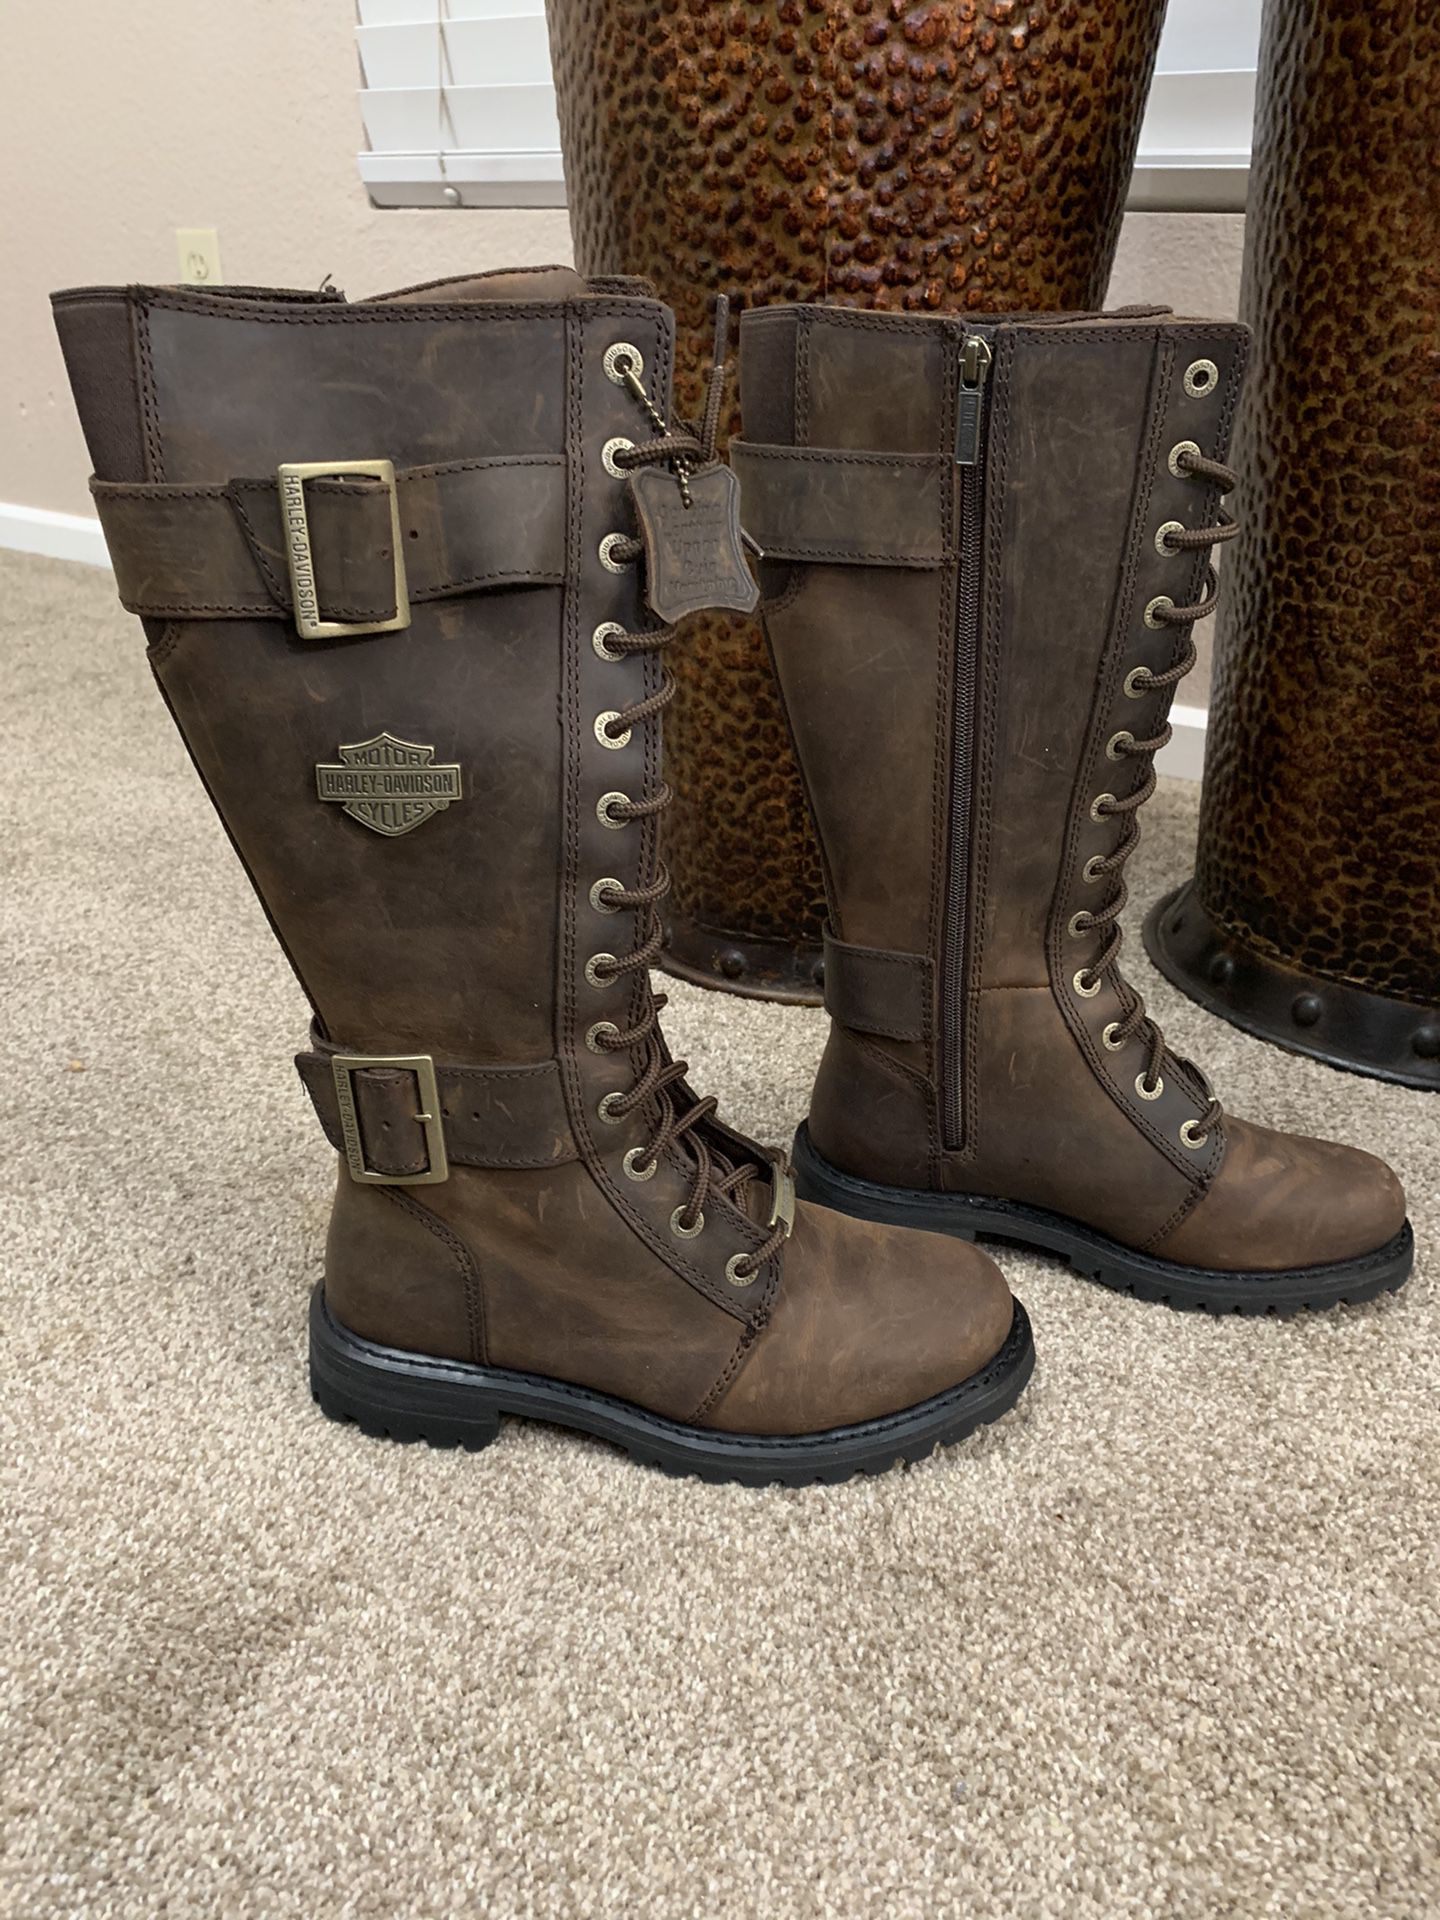 Women’s Harley Davidson Leather Boots